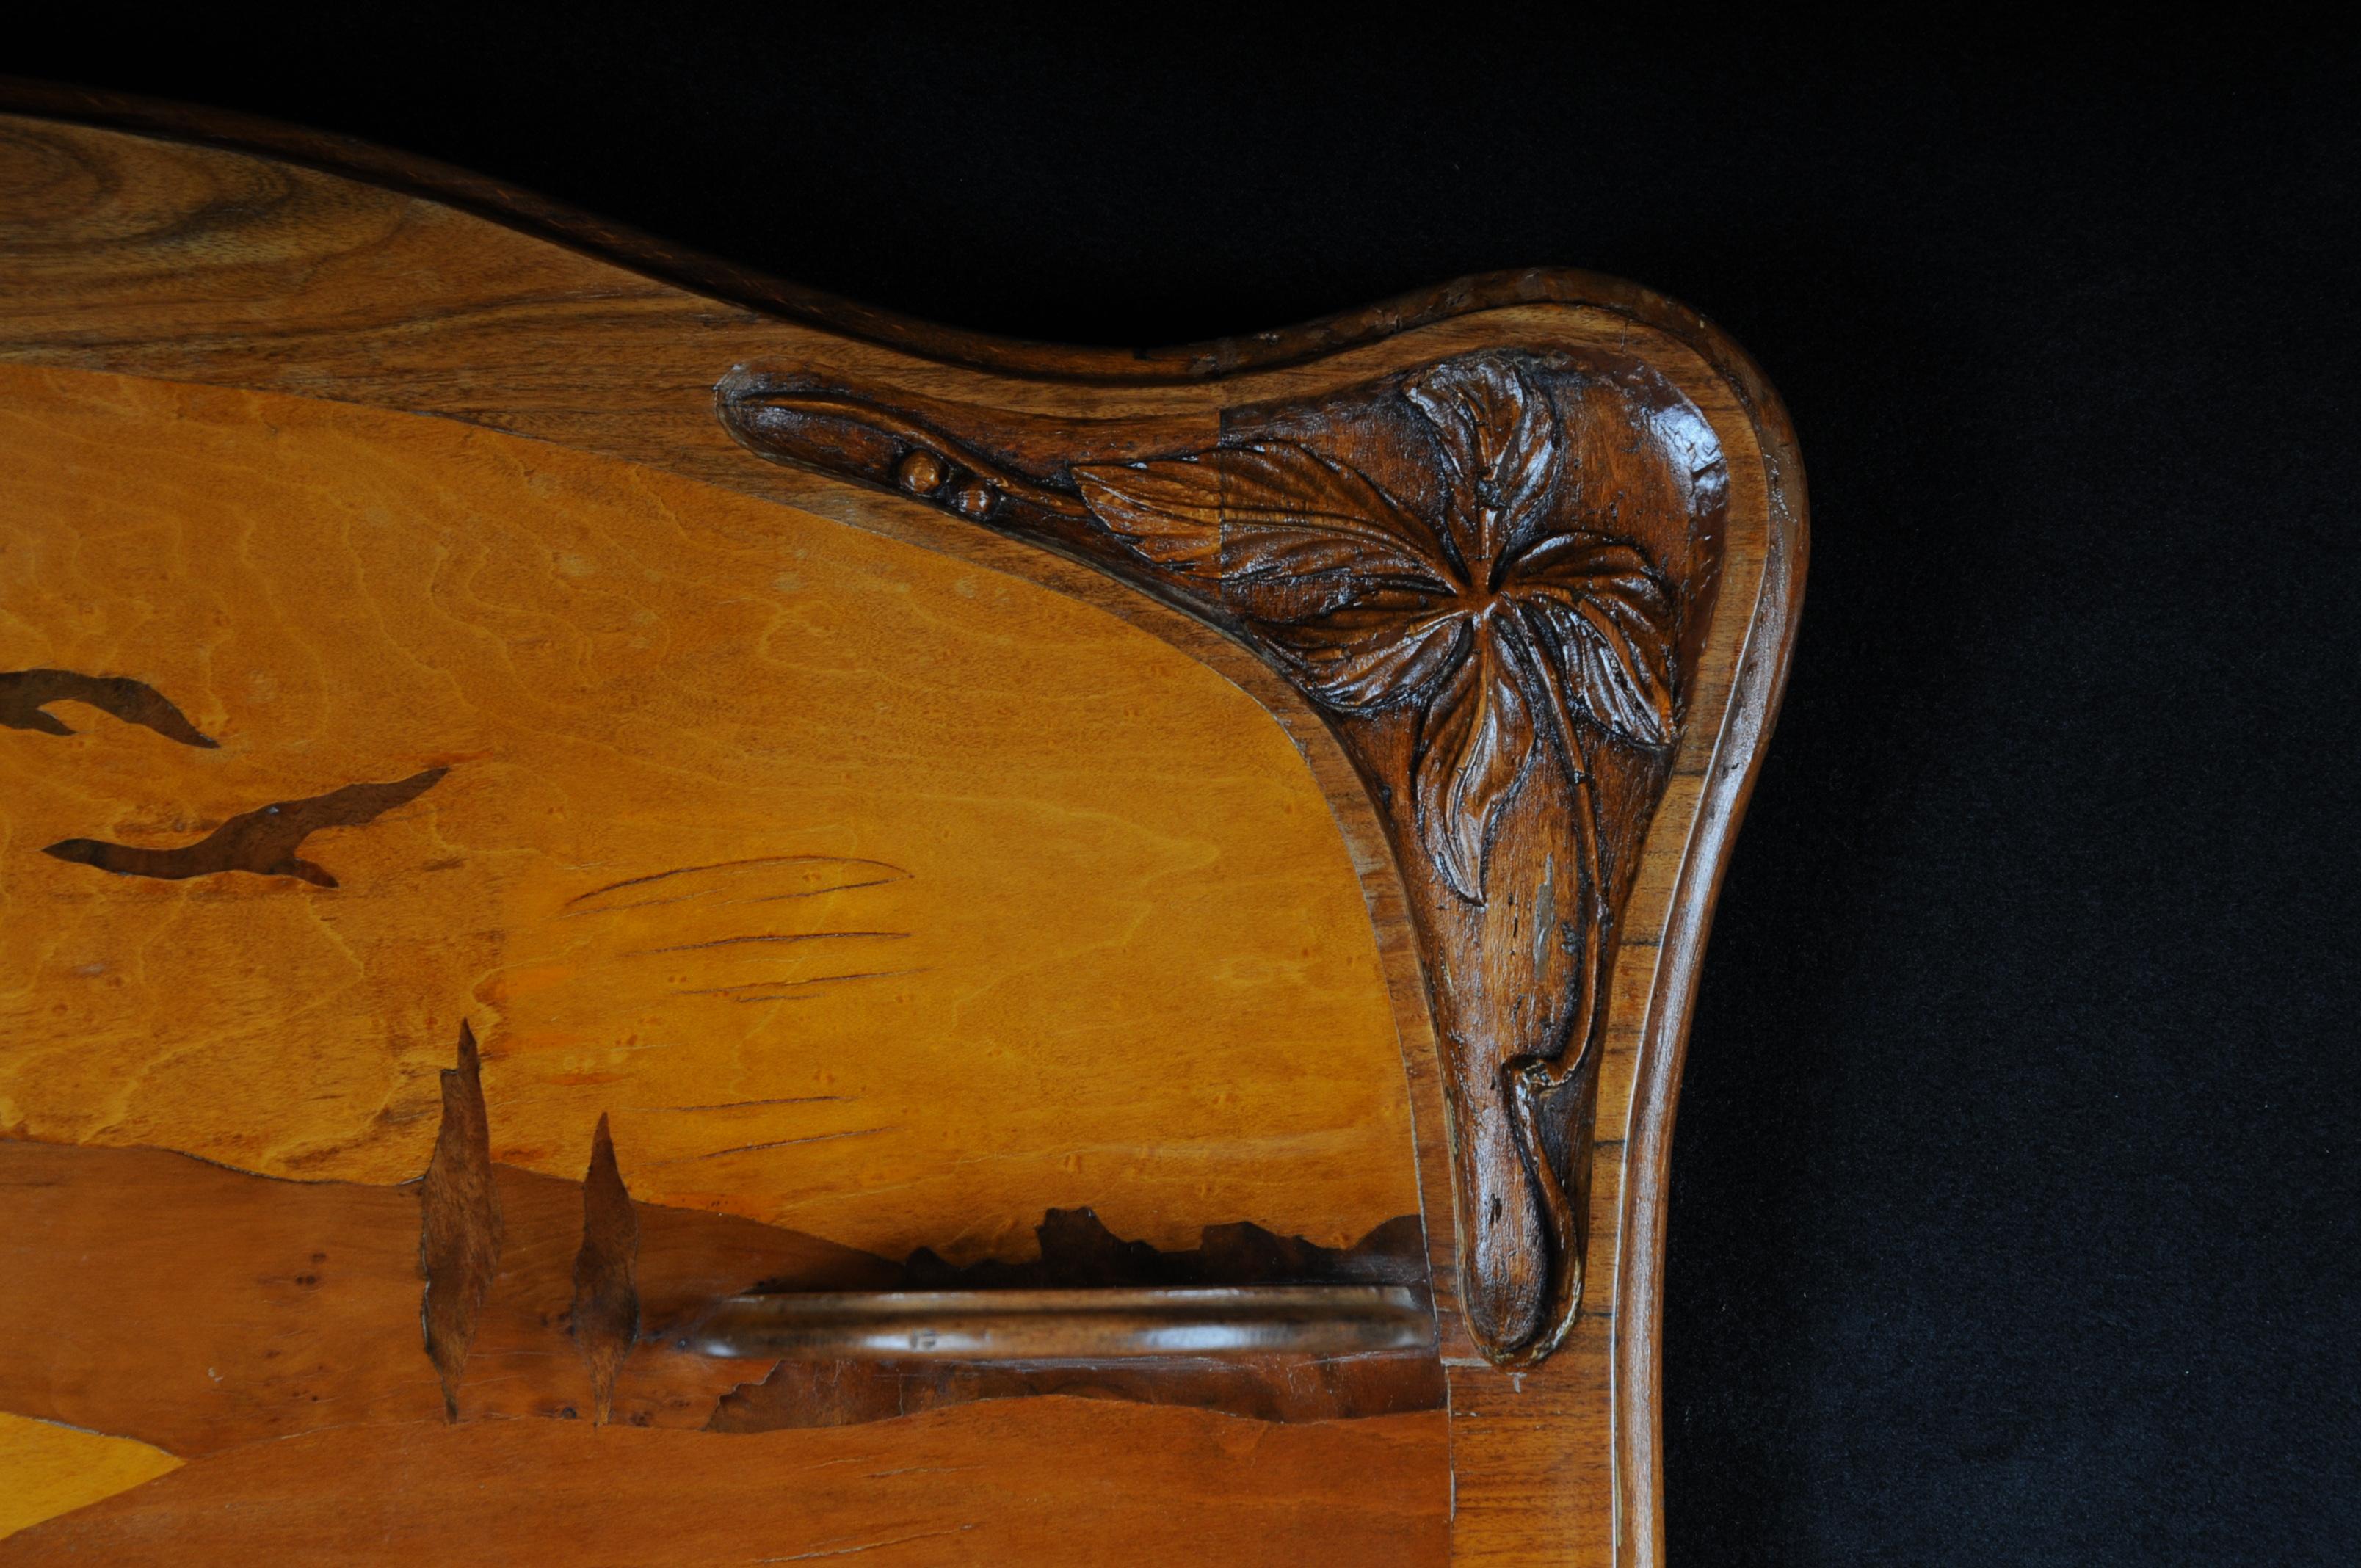 Original wall shelf Emile Galle Art Nouveau, circa 1900
Shield-shaped, inlaid mural created by Emile Galle with a landscape motif of different precious woods.
Signed: Emile Gallé. Extremely rare wall shelf from the Art Nouveau period.

(V-154).